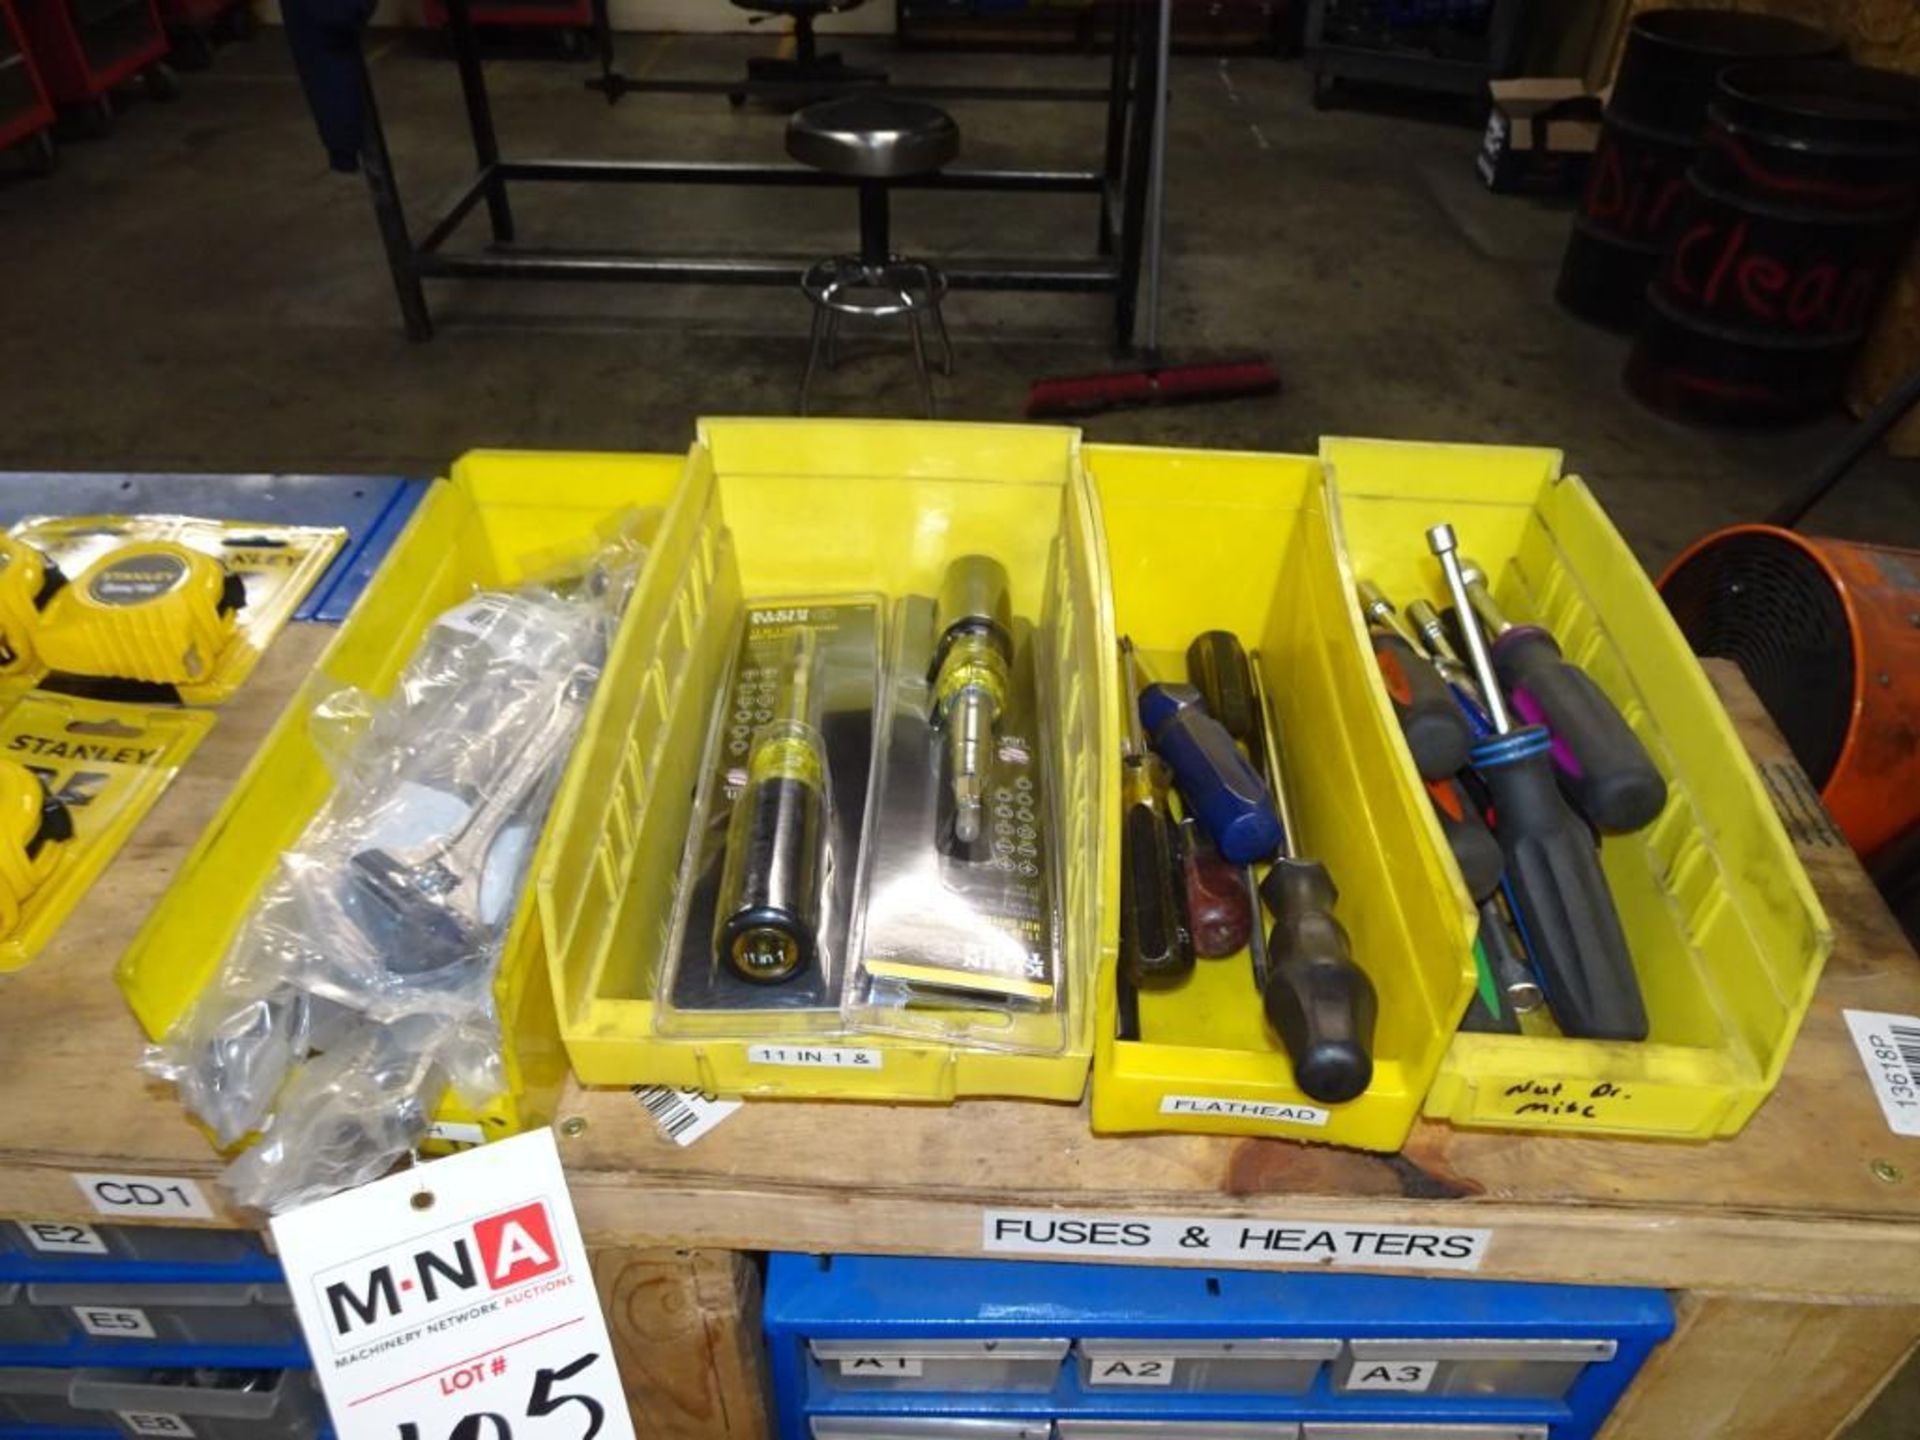 Assorted Shop Tools Consisting of: Screwdrivers and Wrenches